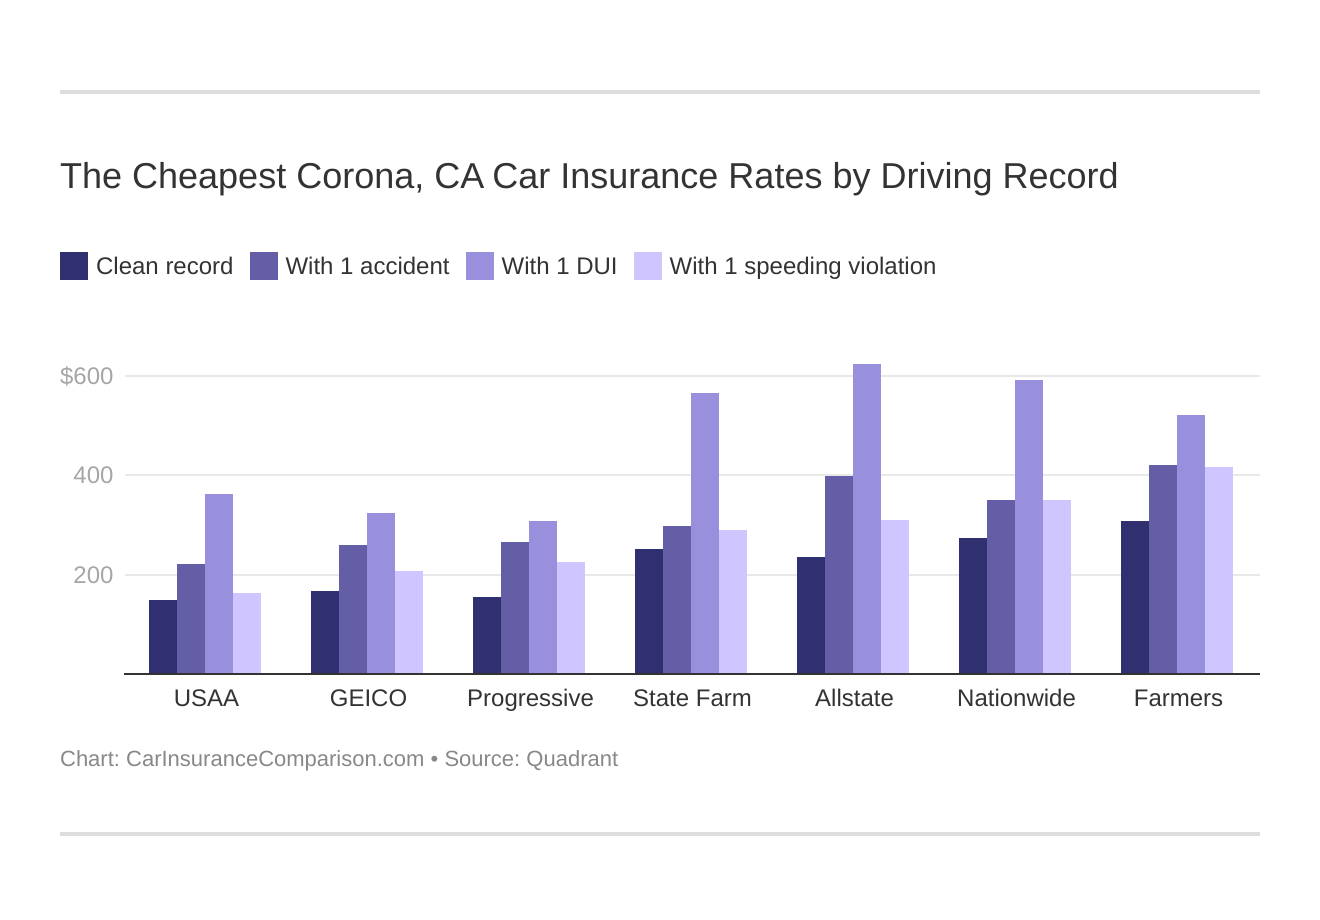 The Cheapest Corona, CA Car Insurance Rates by Driving Record